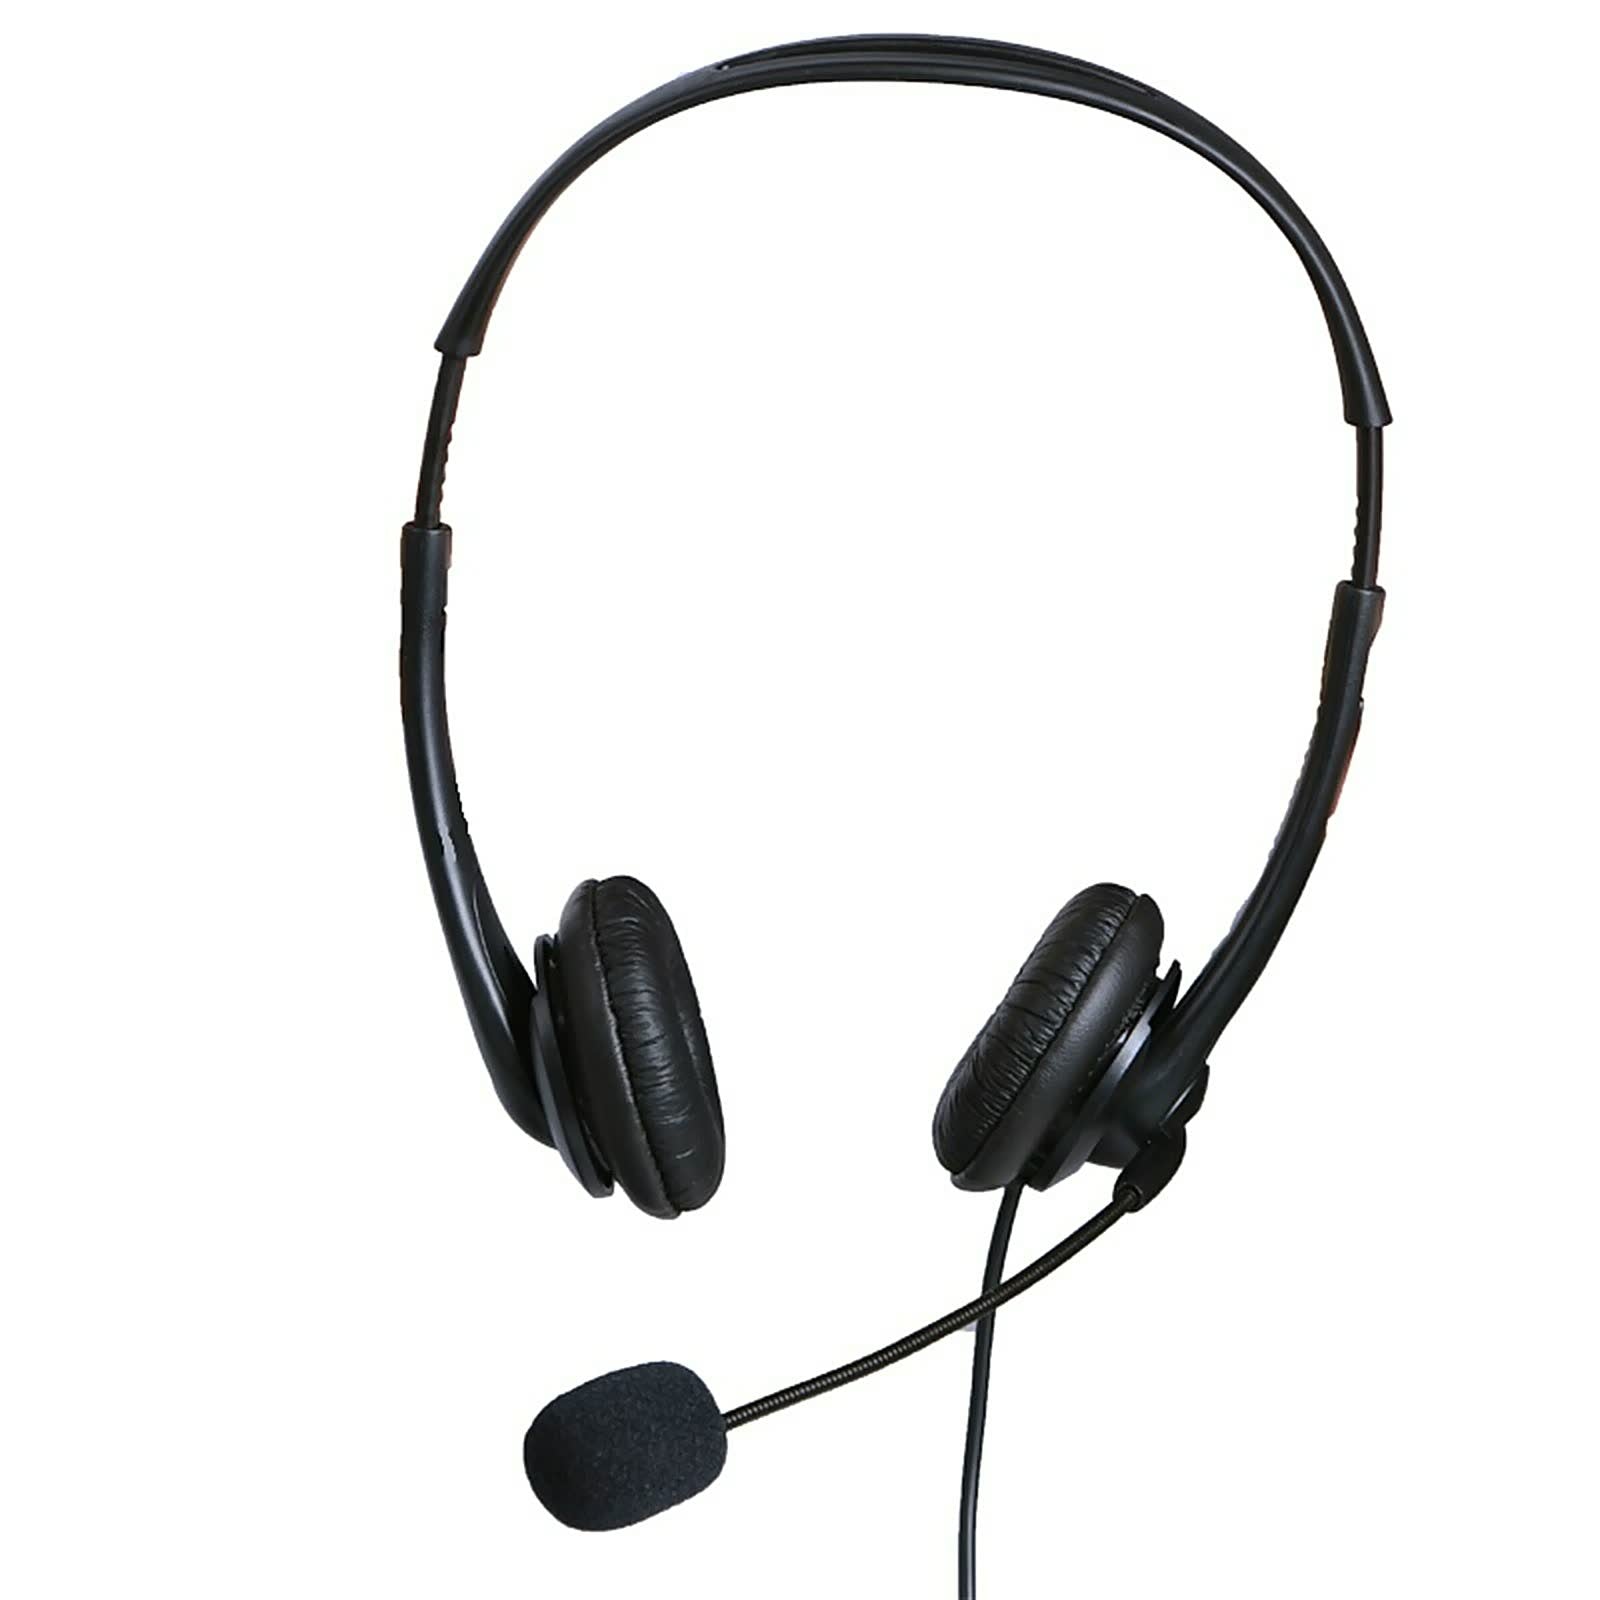 OY136 3.5mm Computer Headset With Microphone Noise Cancelling Head-mounted Headphone Wired Call Center Headsets For Business Call Center